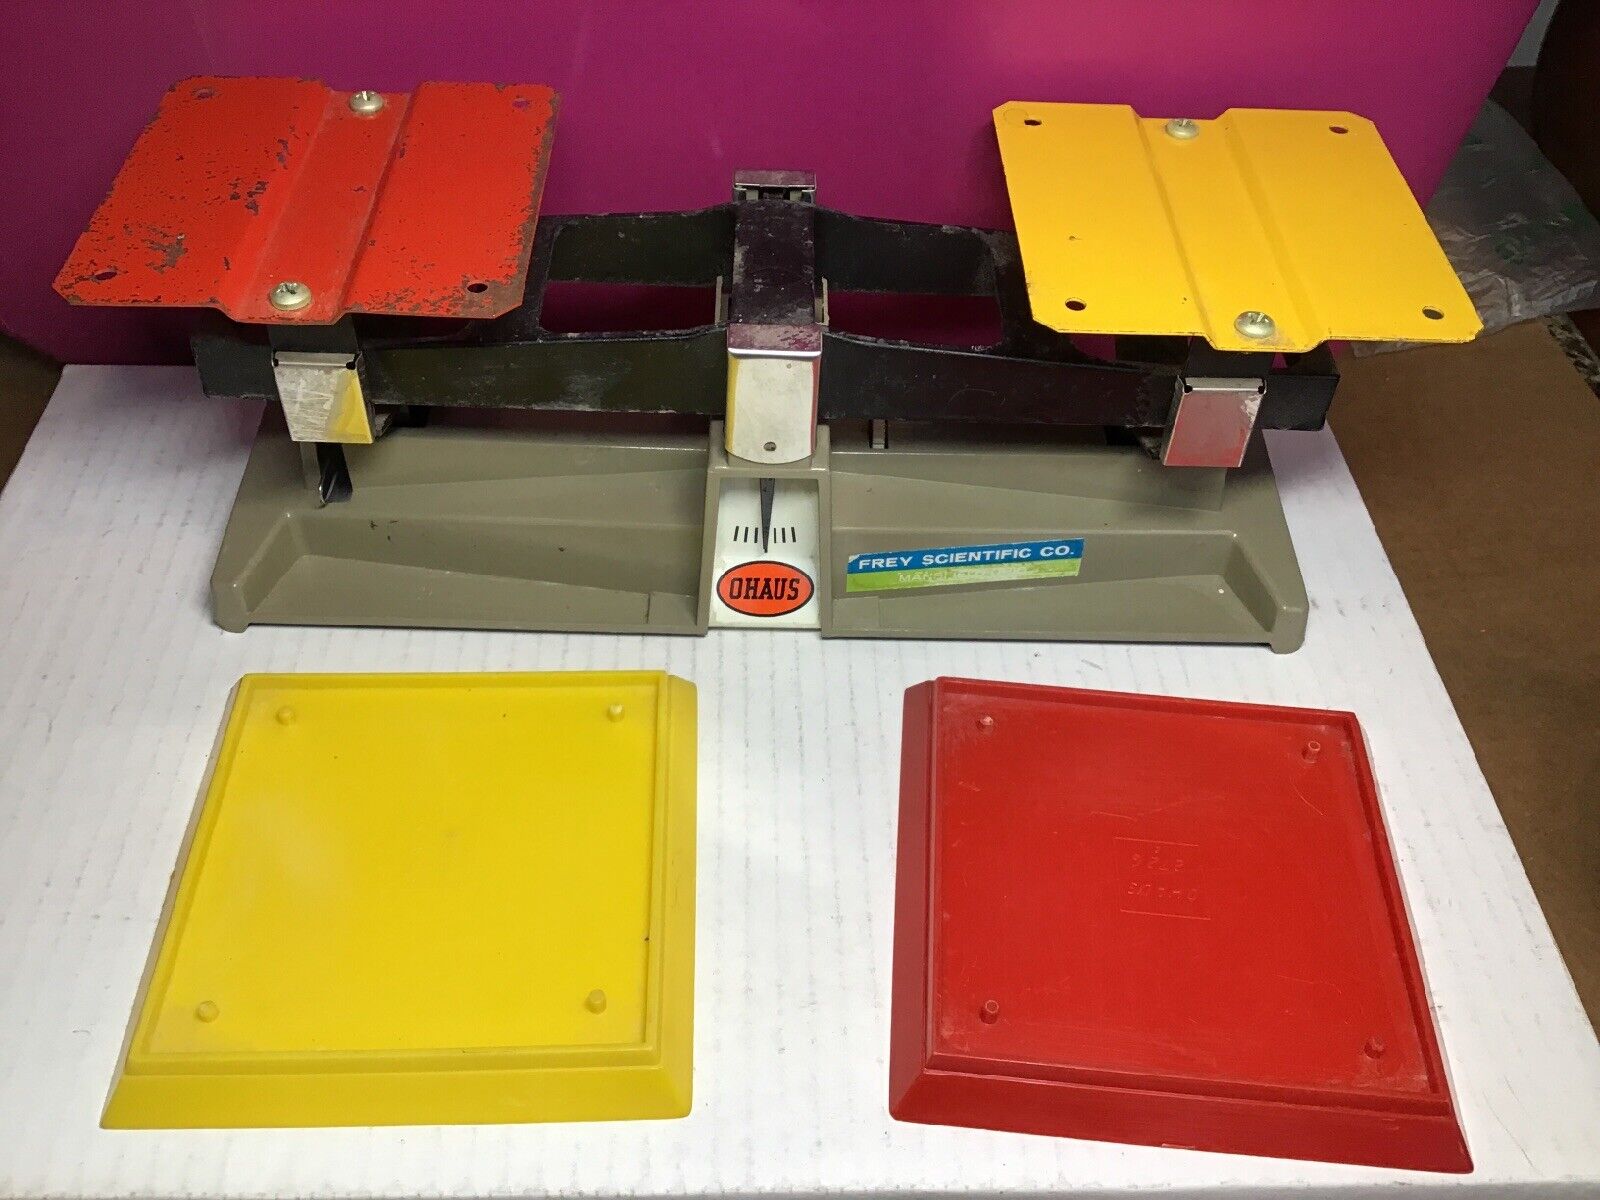 Vintage Ohaus Scientific Metal Scale Frey Scientific Co. Scale & Trays